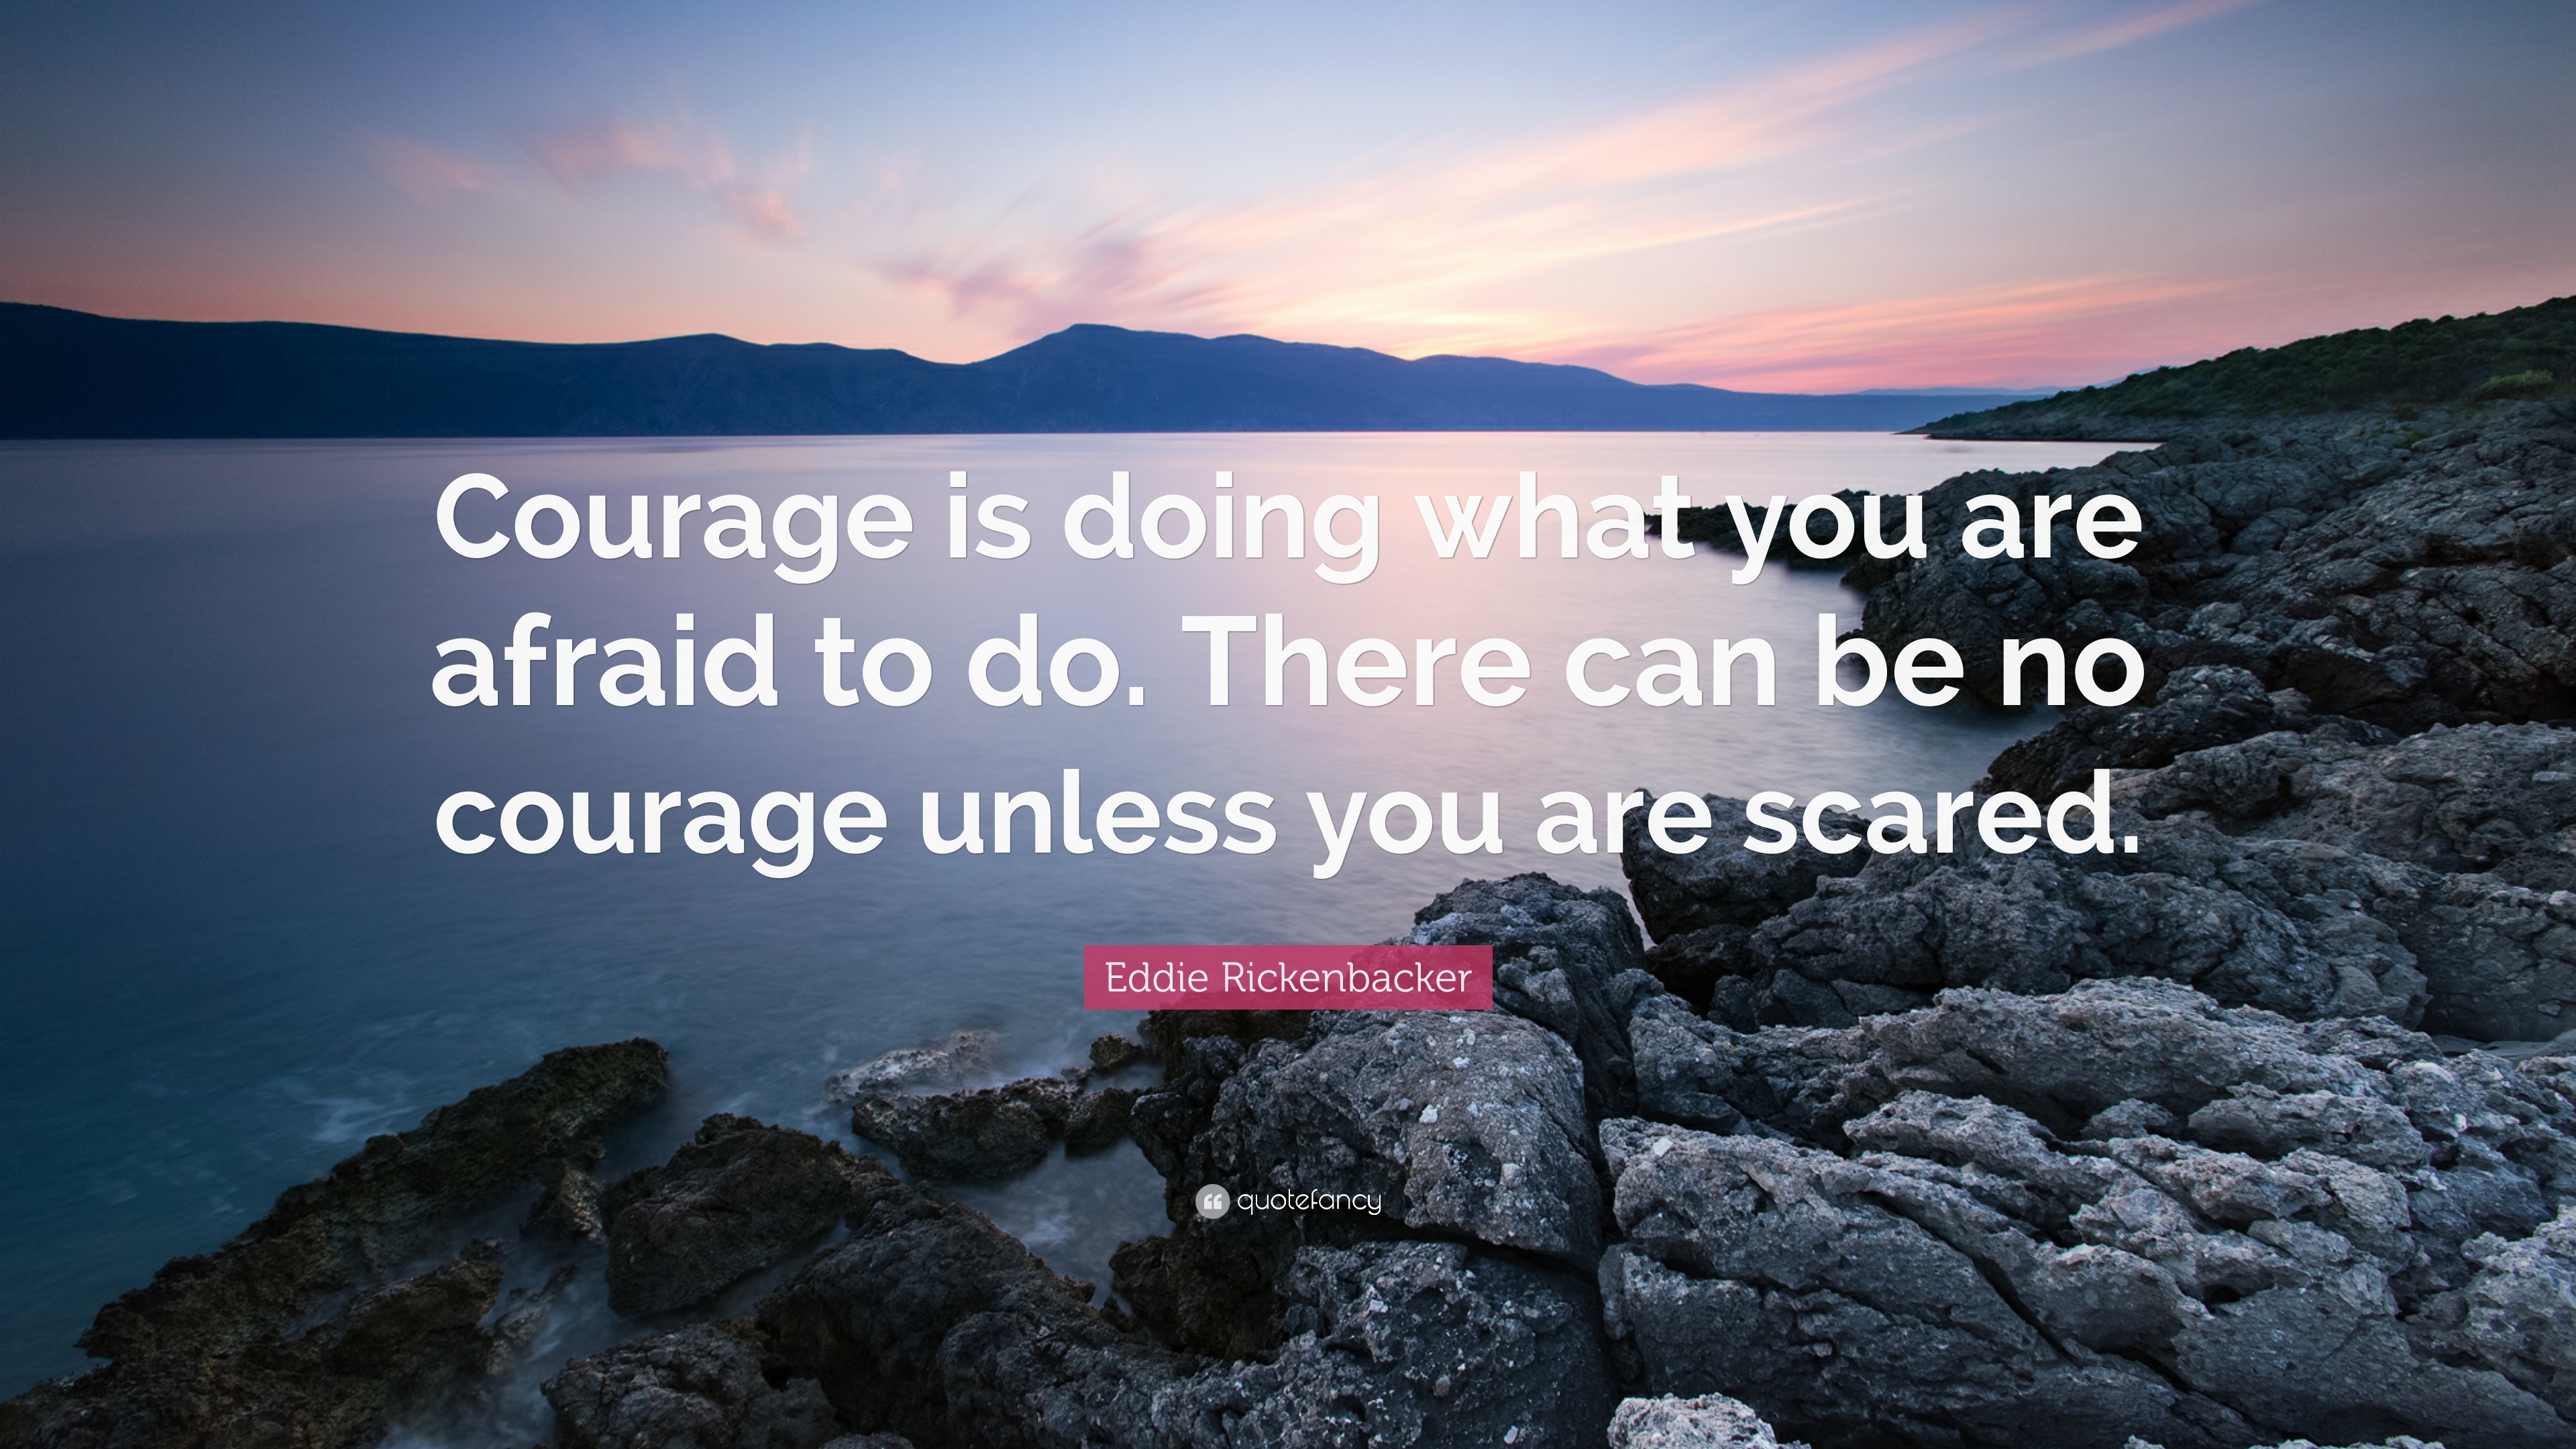 Eddie Rickenbacker Quote: "Courage is doing what you are ...